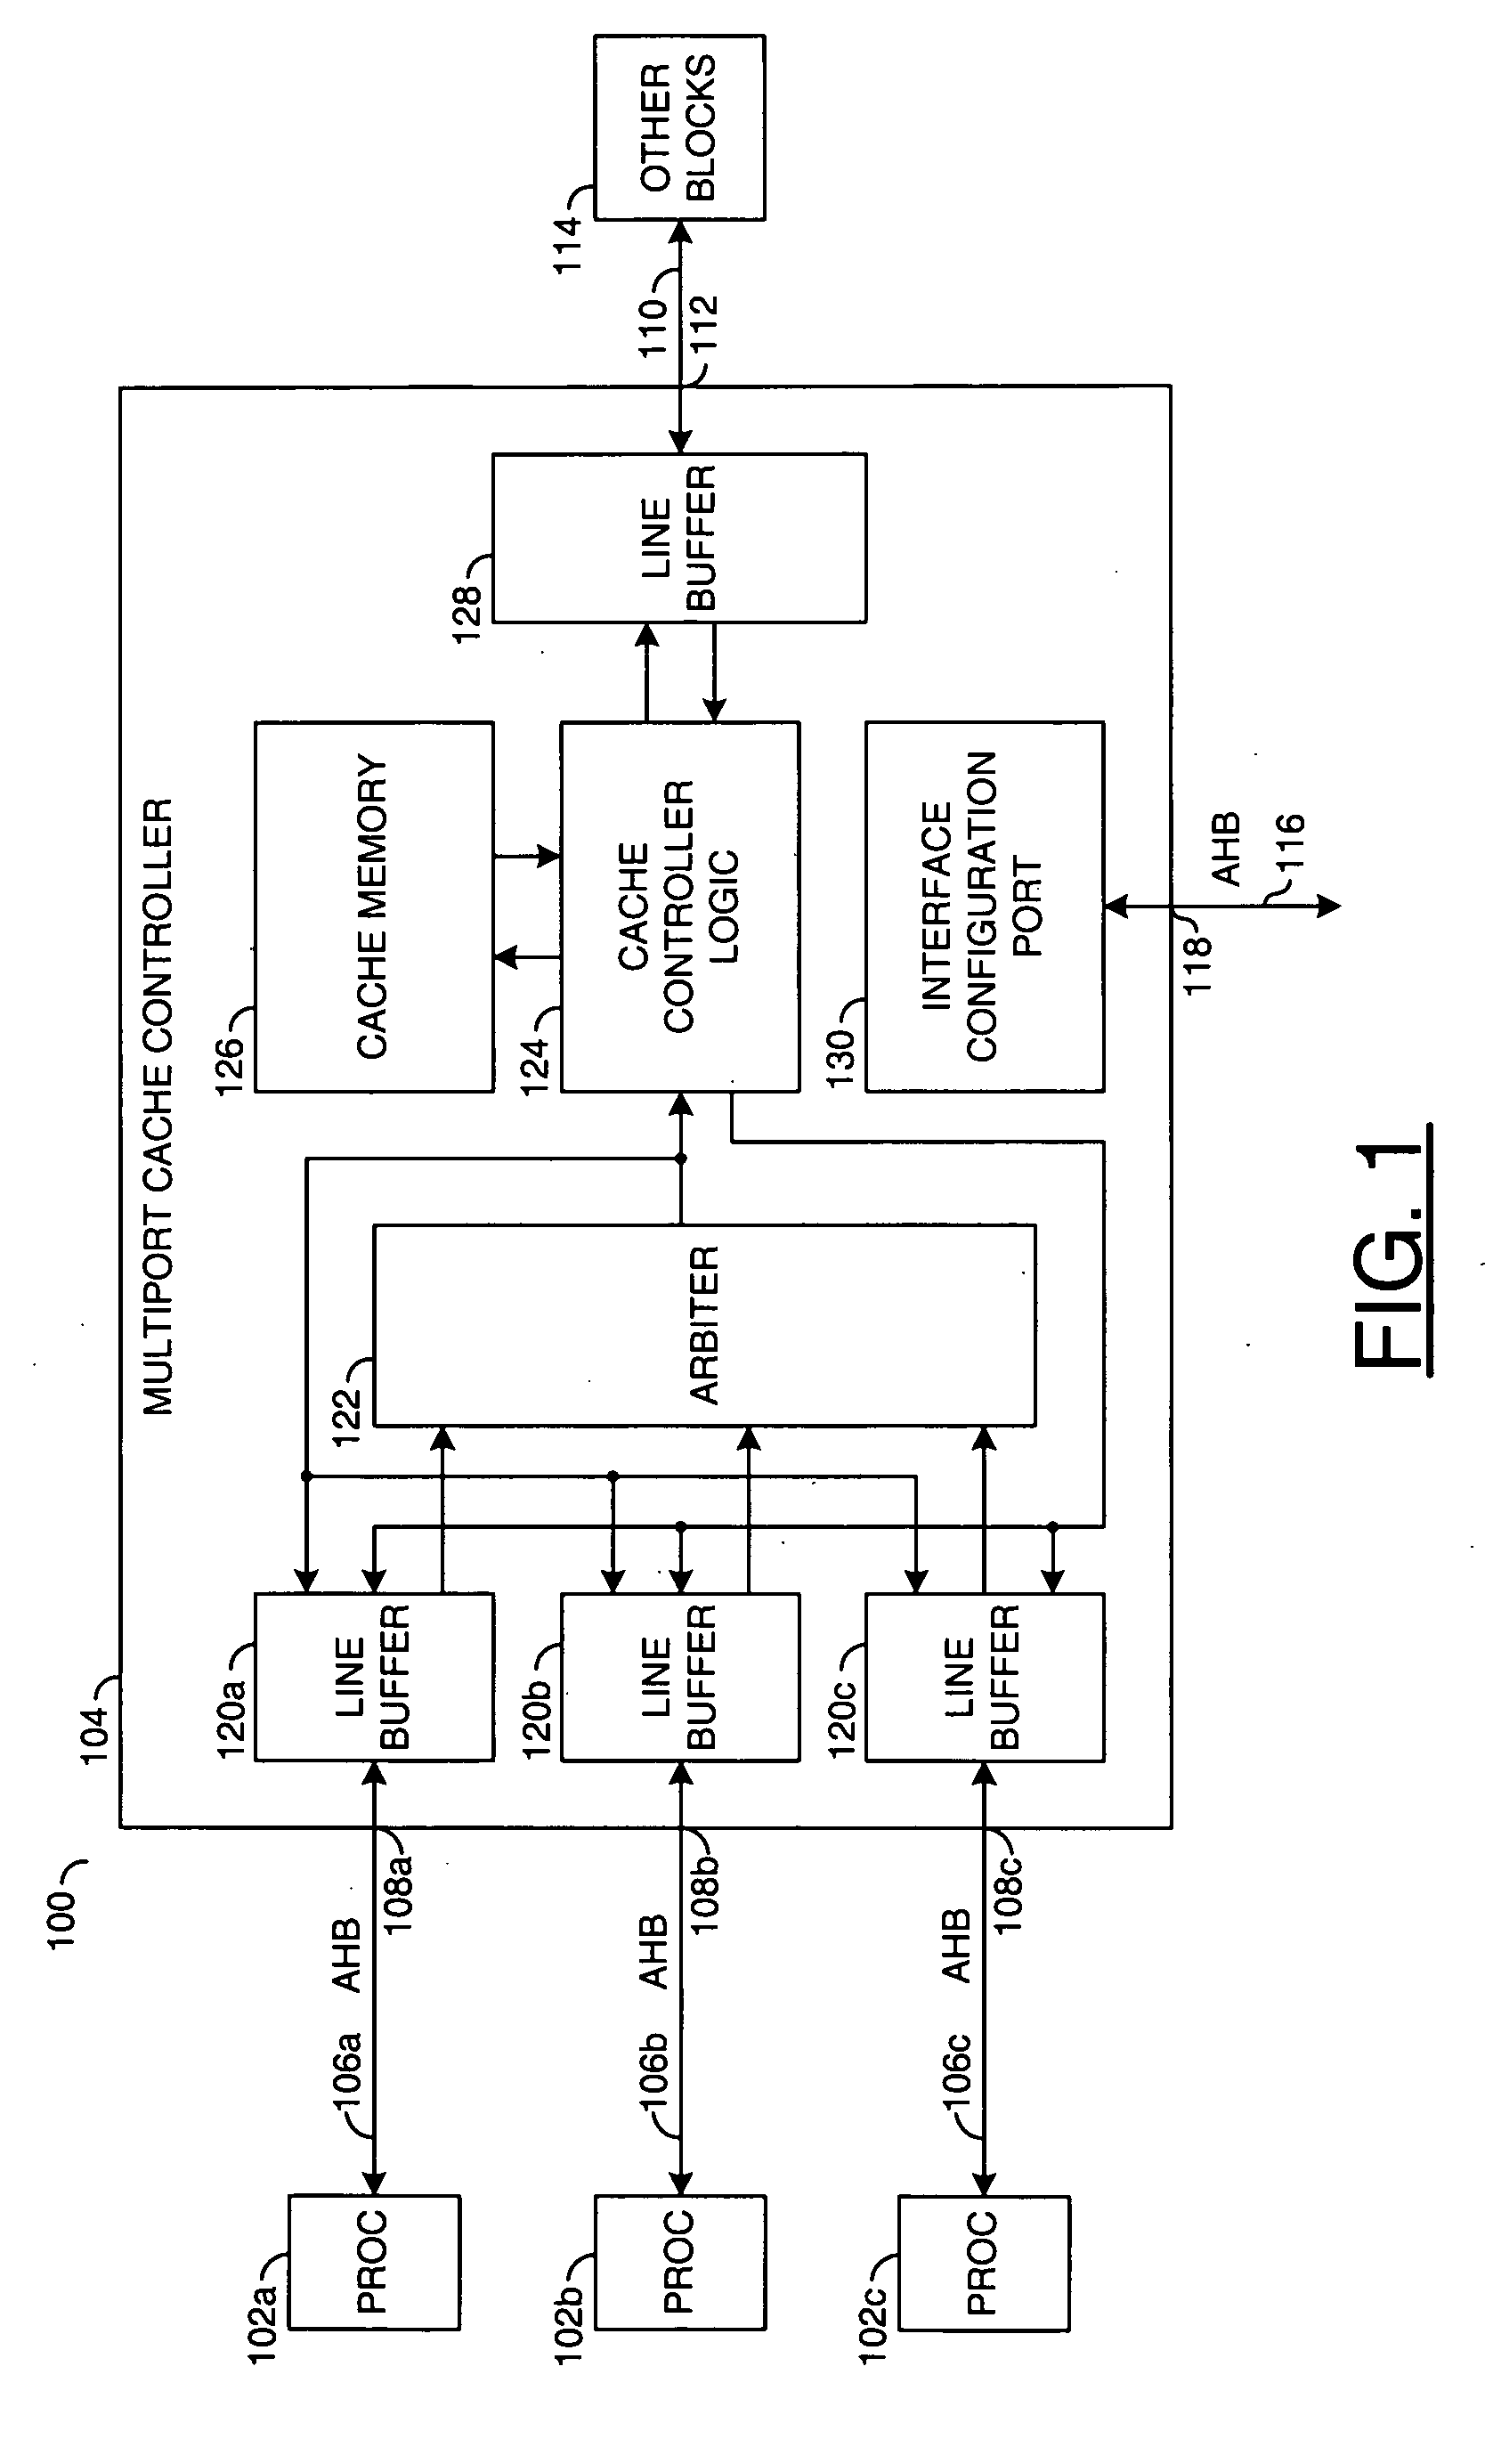 Ternary cam with software programmable cache policies